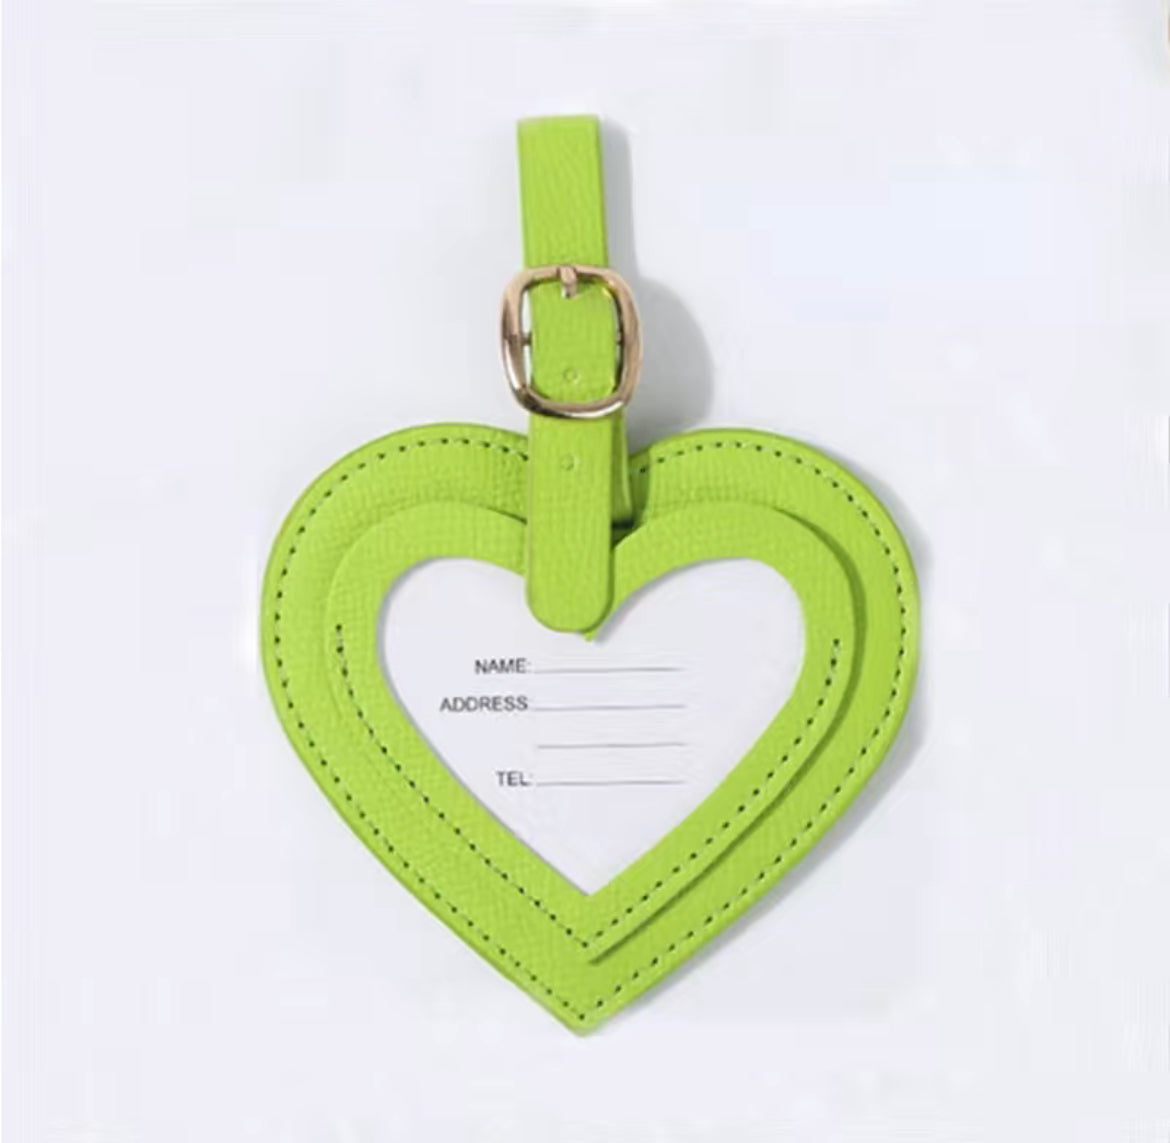 6 Colors Hot Stamping Suitcase Luggage Tag Label Loving Heart Couples  Handbag Portable Travel Accessories Name